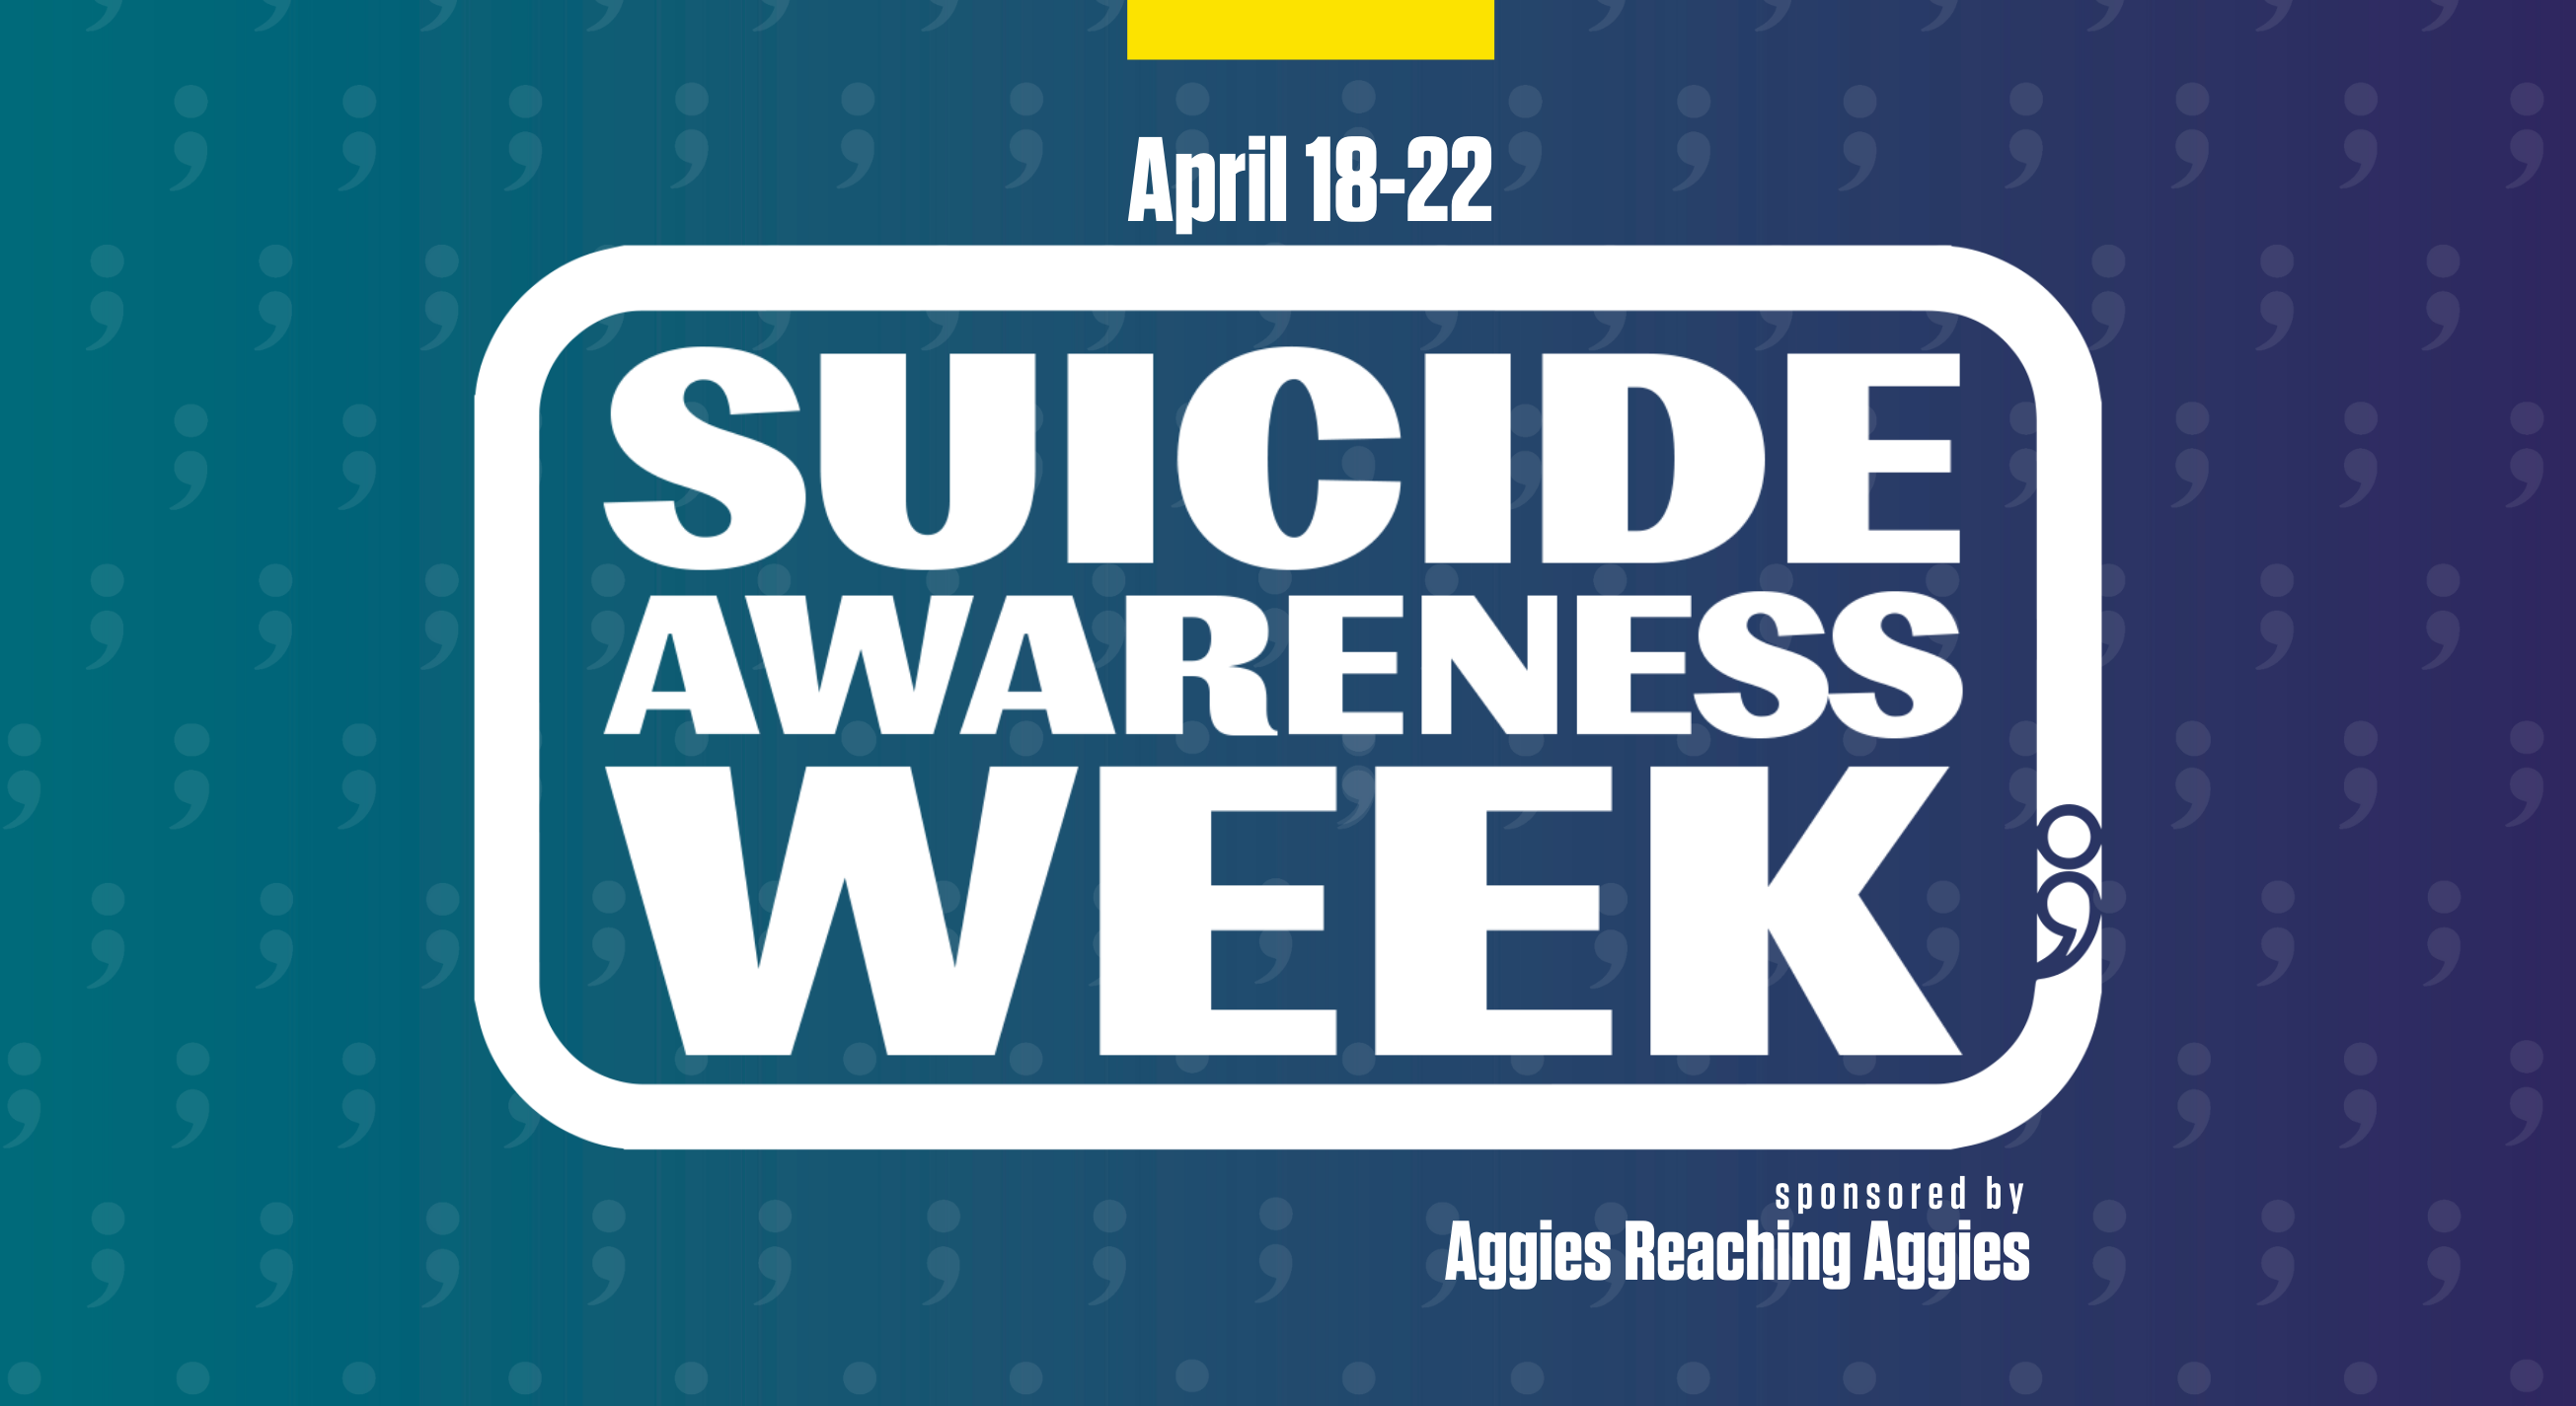 A teal-and-purple graphic covered in a field of faint semicolons features the text, "Suicide Awareness Week, April 18-22, sponsored by Aggies Reaching Aggies."